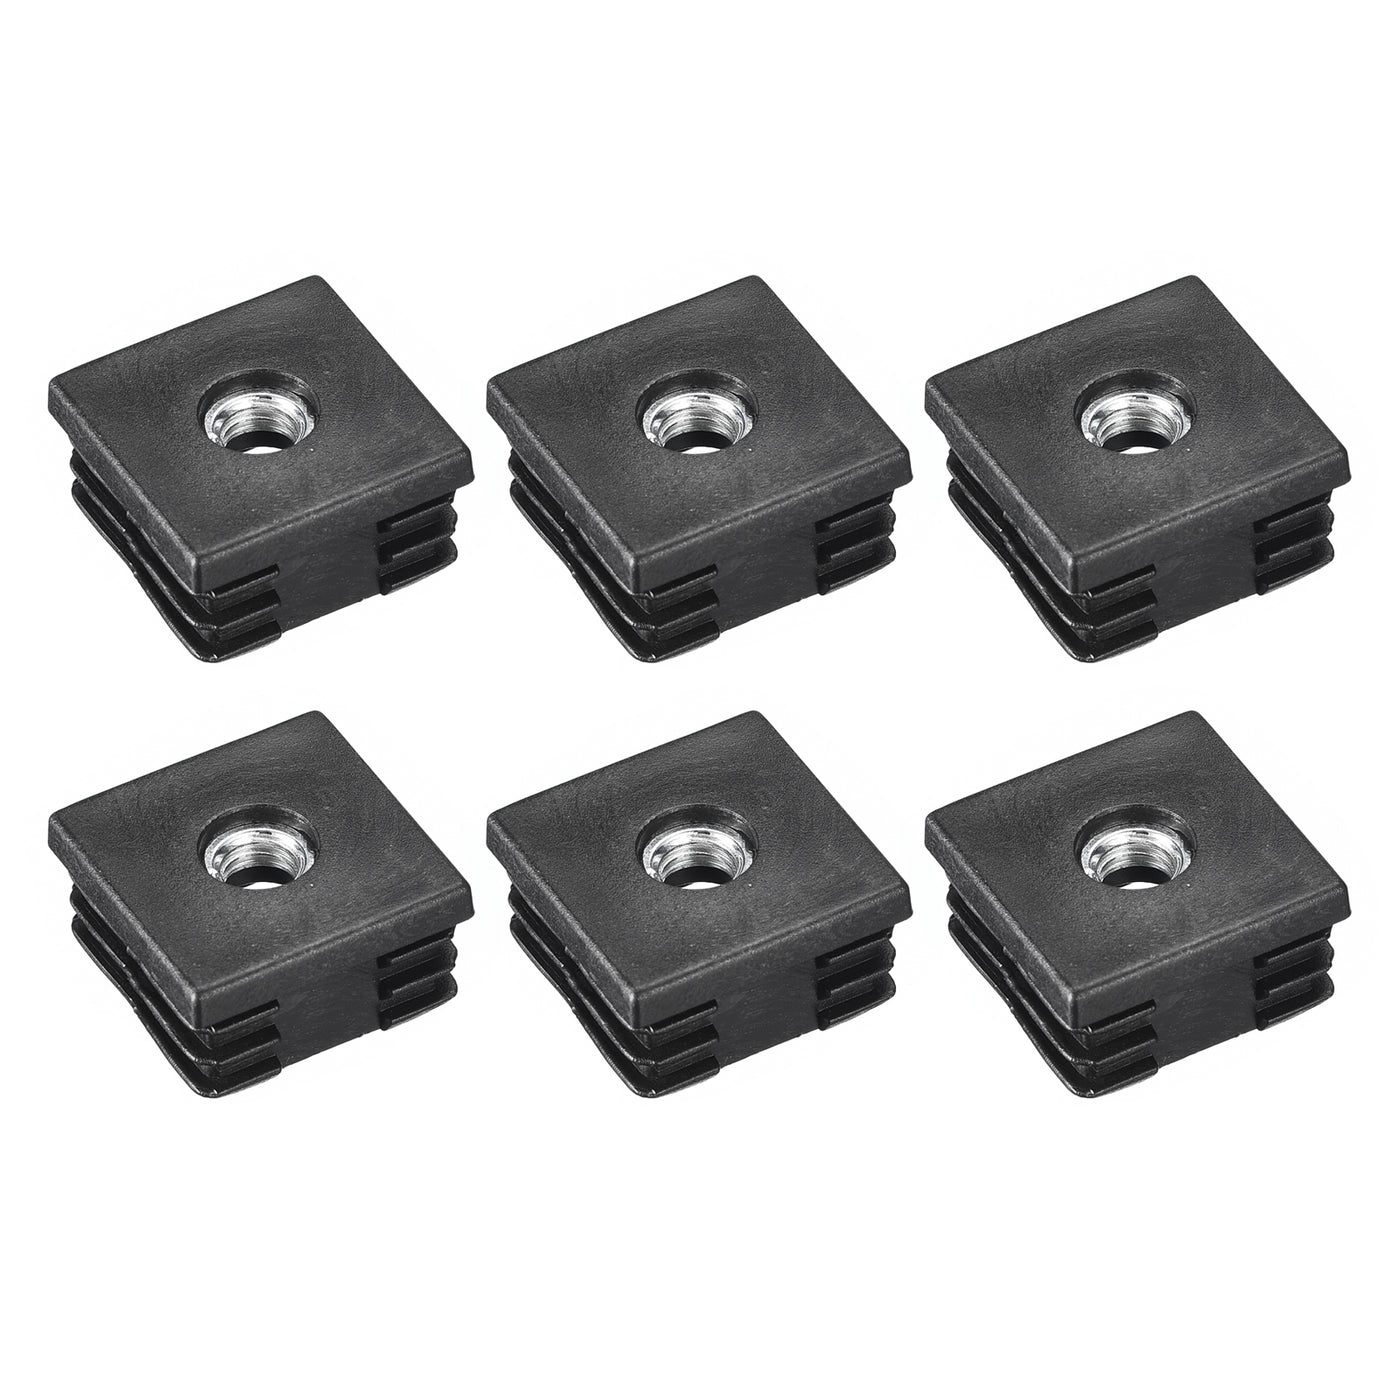 uxcell Uxcell 6Pcs 1.18"x1.18" Caster Insert with Thread, Square M8 Thread for Furniture